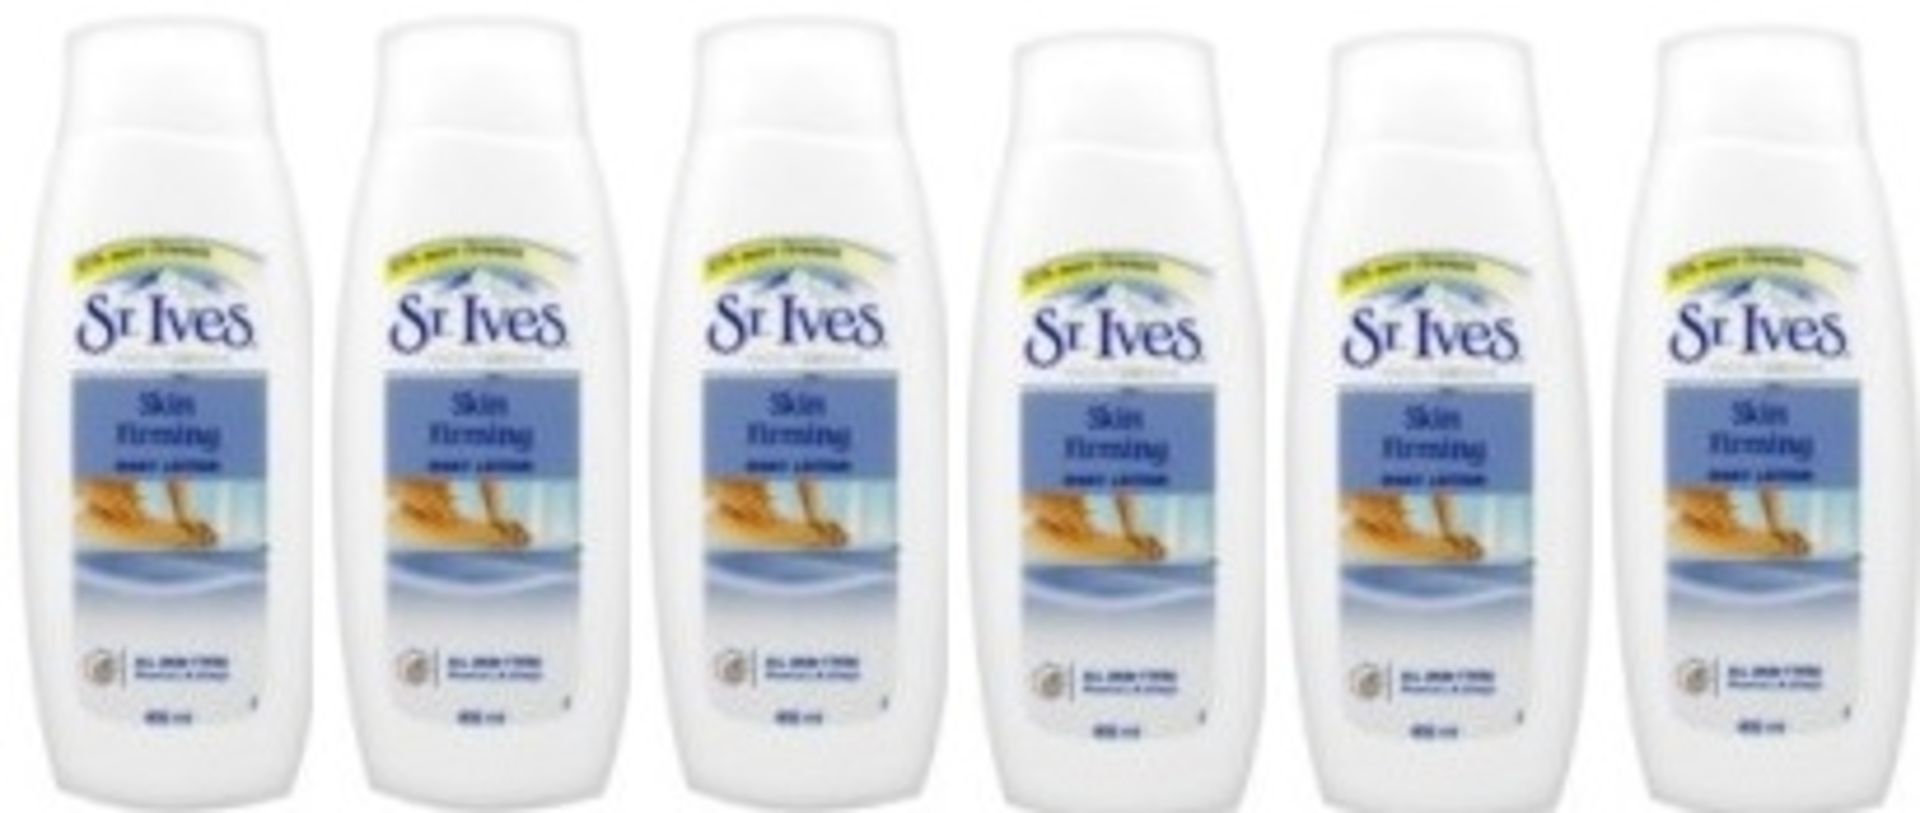 V Grade A A Lot Of Six 400ml Bottles St Ives Swiss Formula Rosemary & Ginko Firming Body Lotion